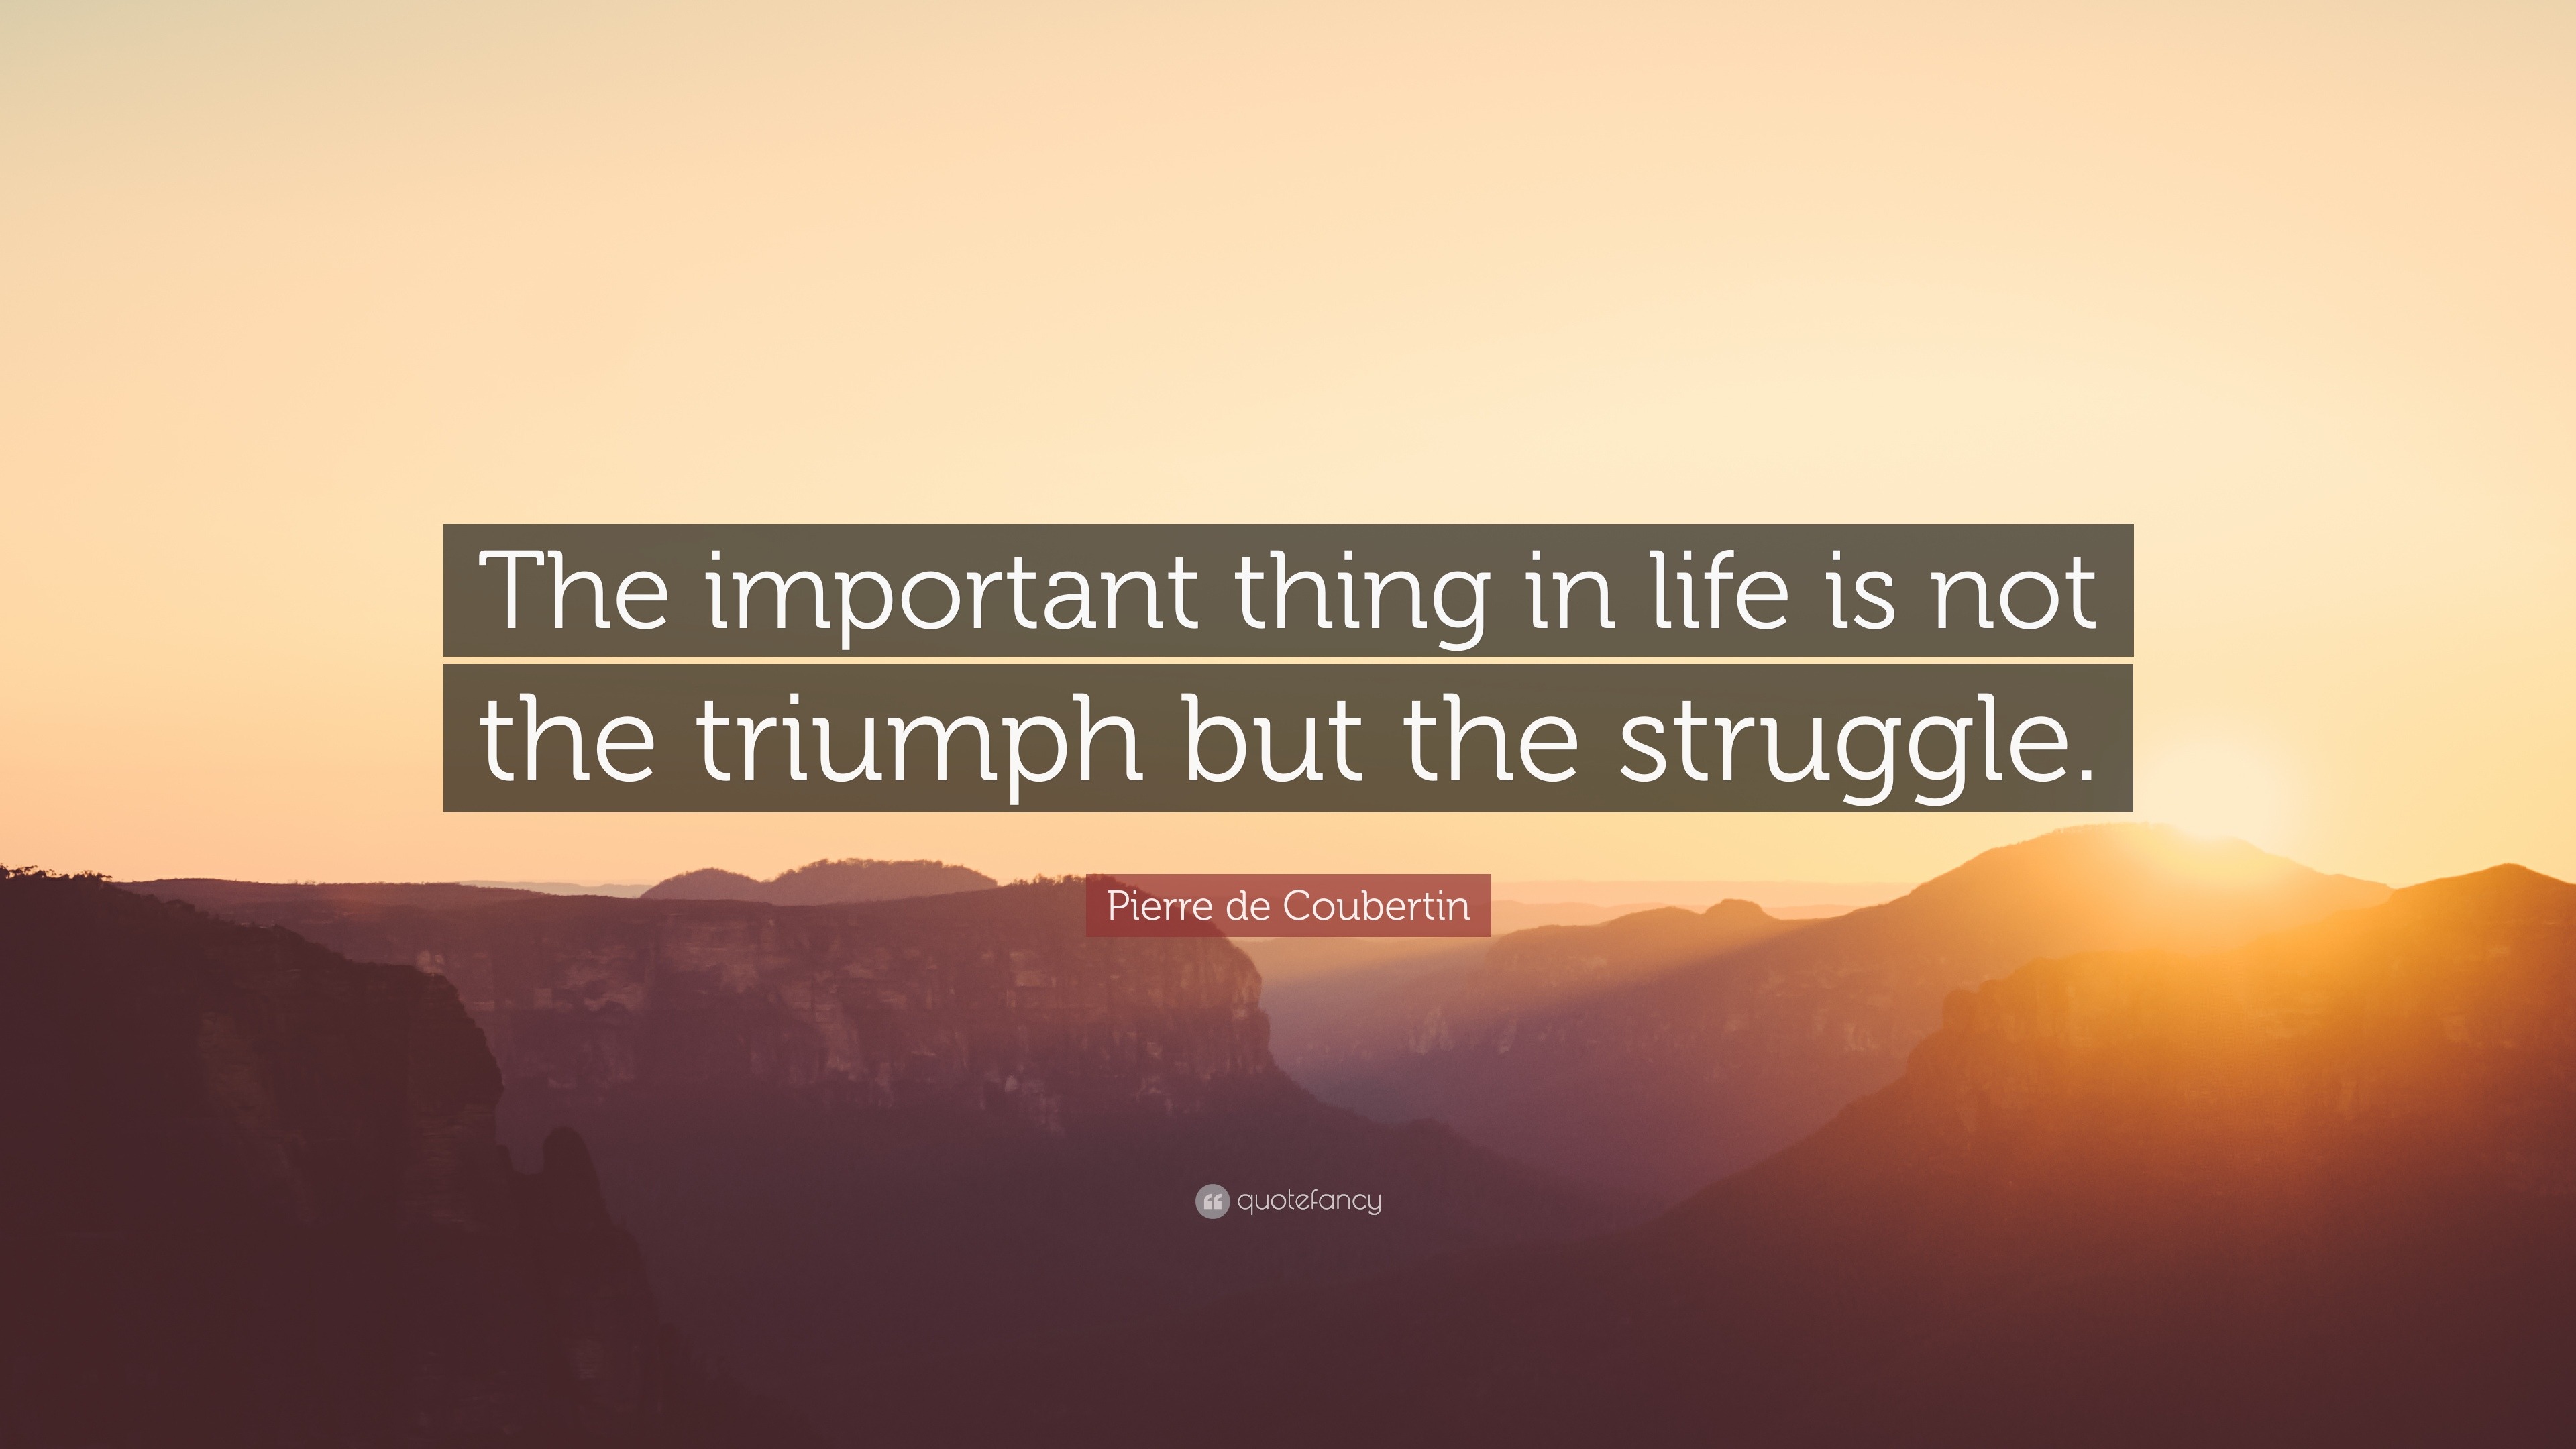 Pierre de Coubertin Quote “The important thing in life is not the triumph but